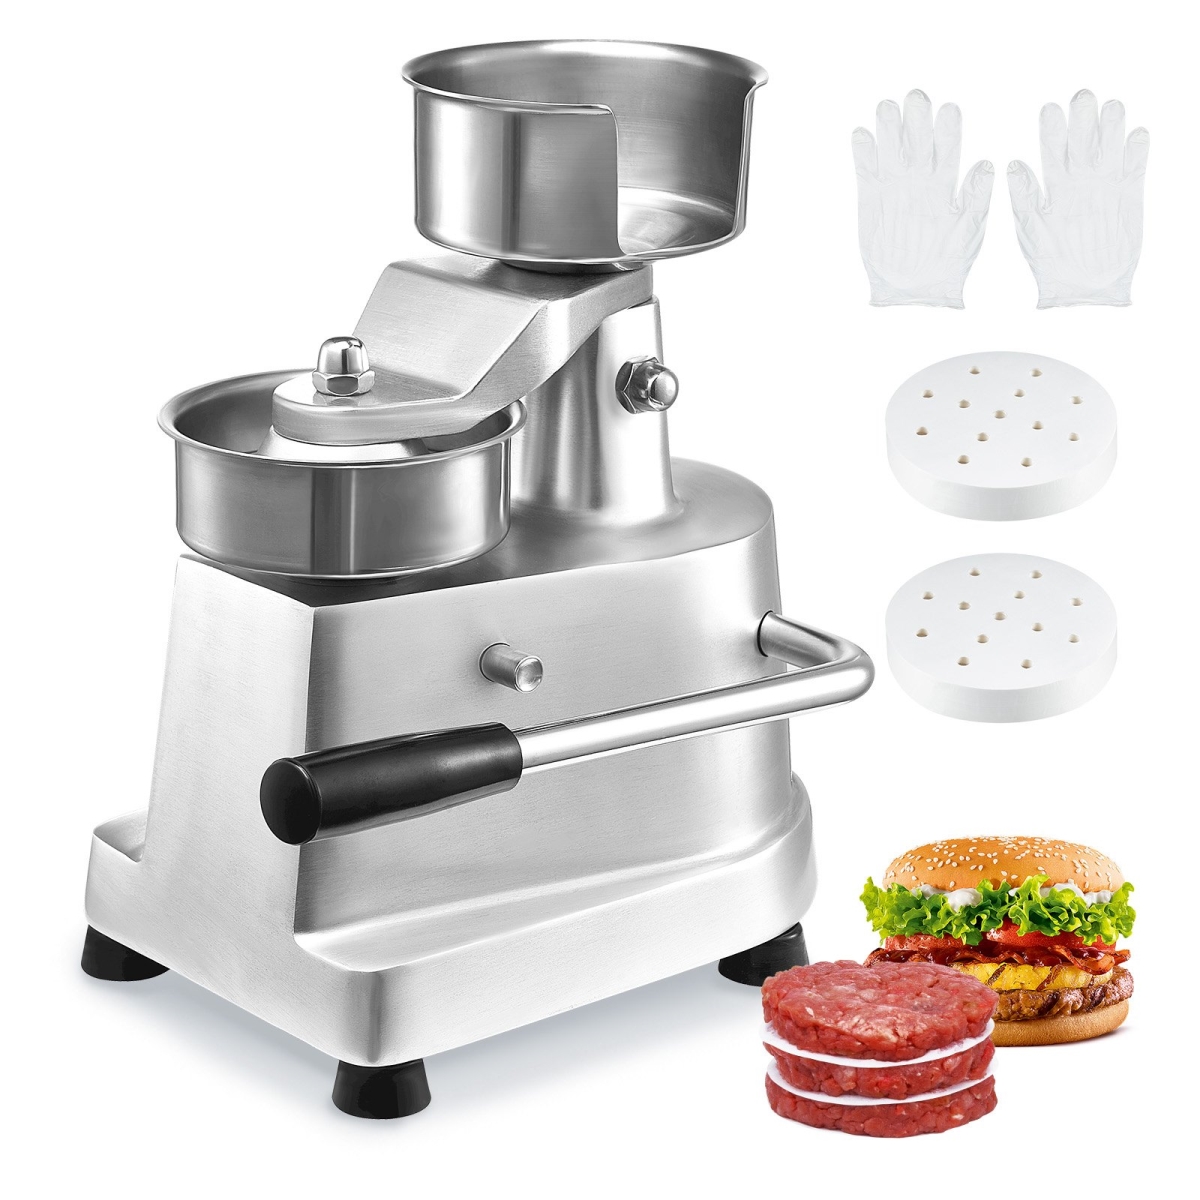 Picture of Vevor HBRBJYSZLBXGEZ9OPV0 4 in. Commercial Burger Patty Maker